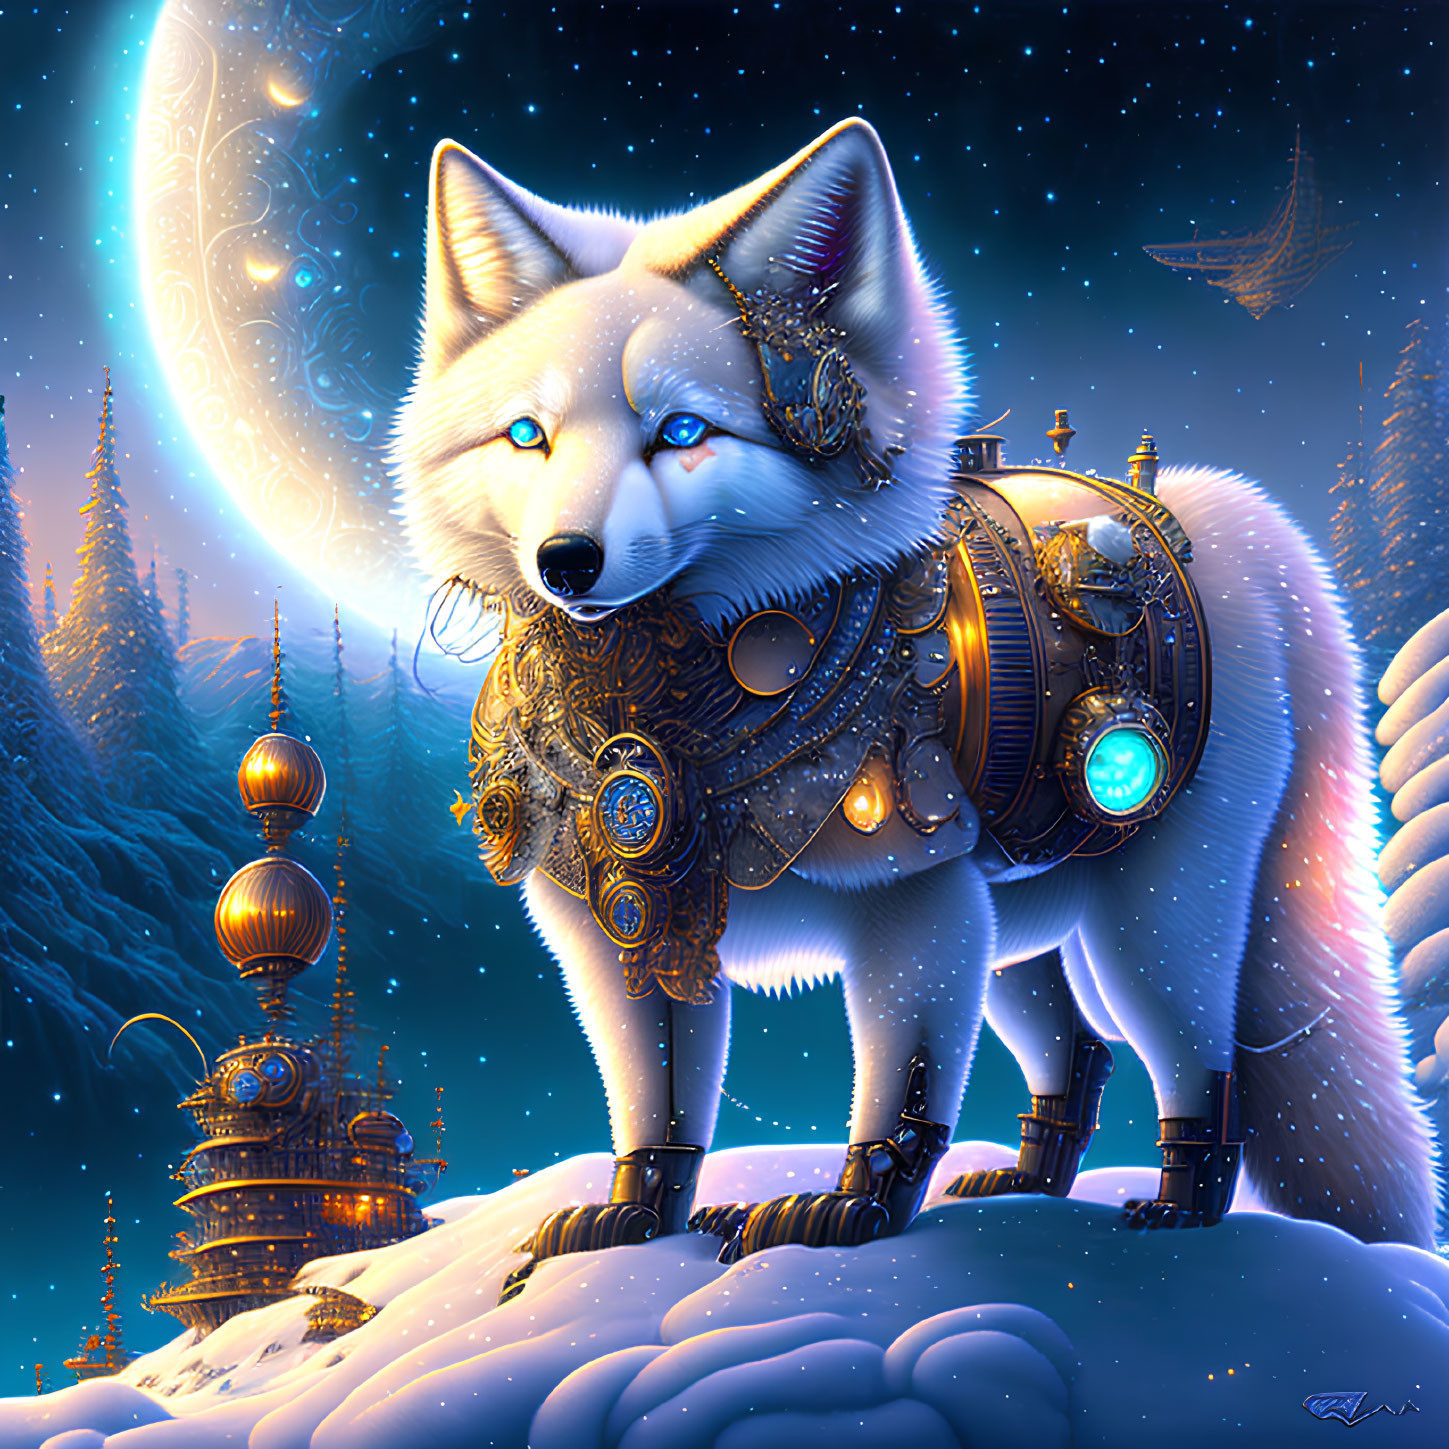 Fantasy white fox with golden armor in snow landscape with crescent moon and tower.